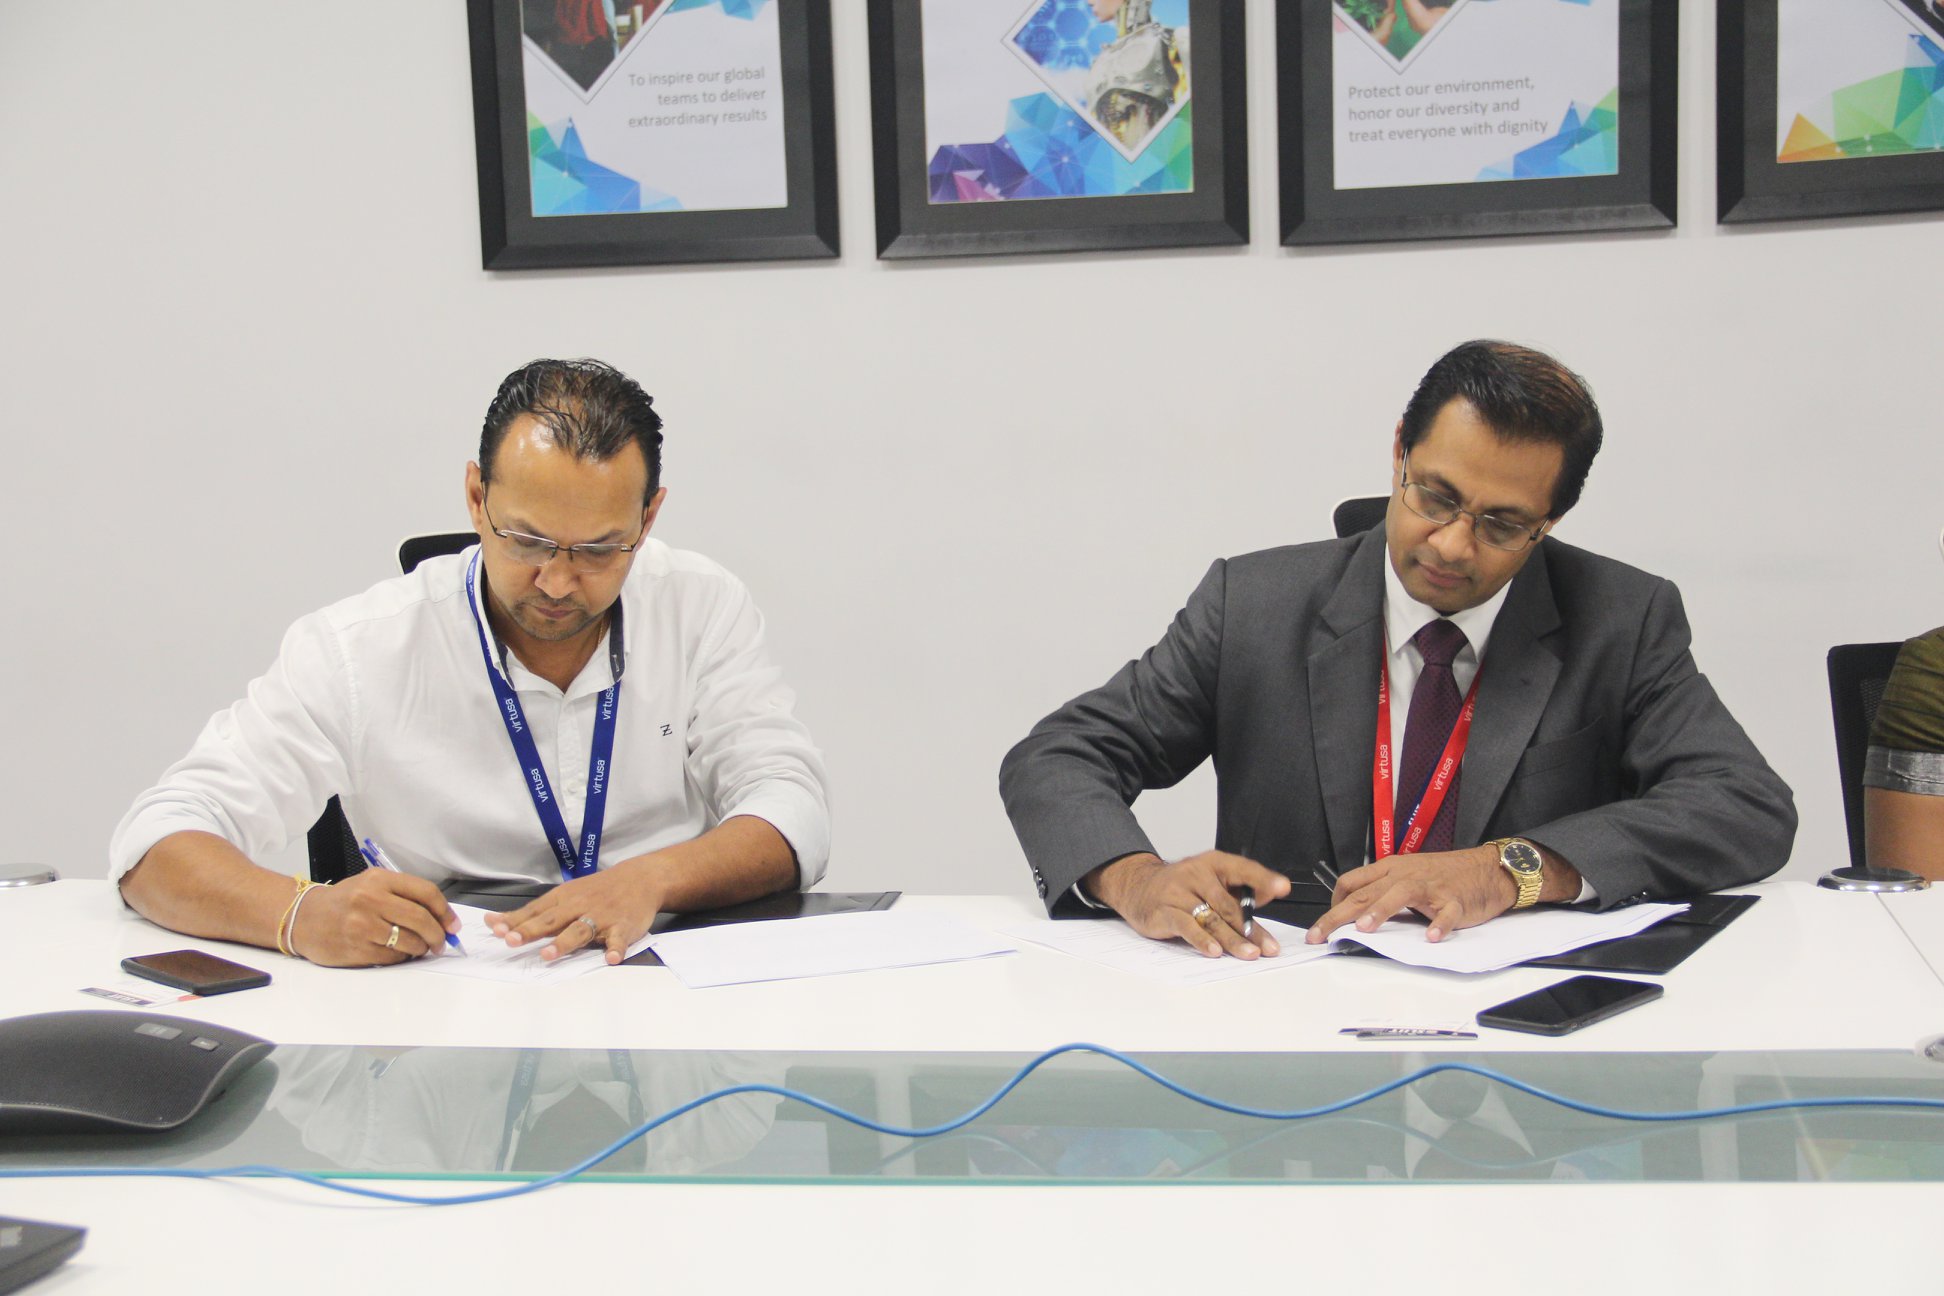 A-MoU-for-Educational-Cooperation-between-SLIIT-Business-School-and-Virtusa-